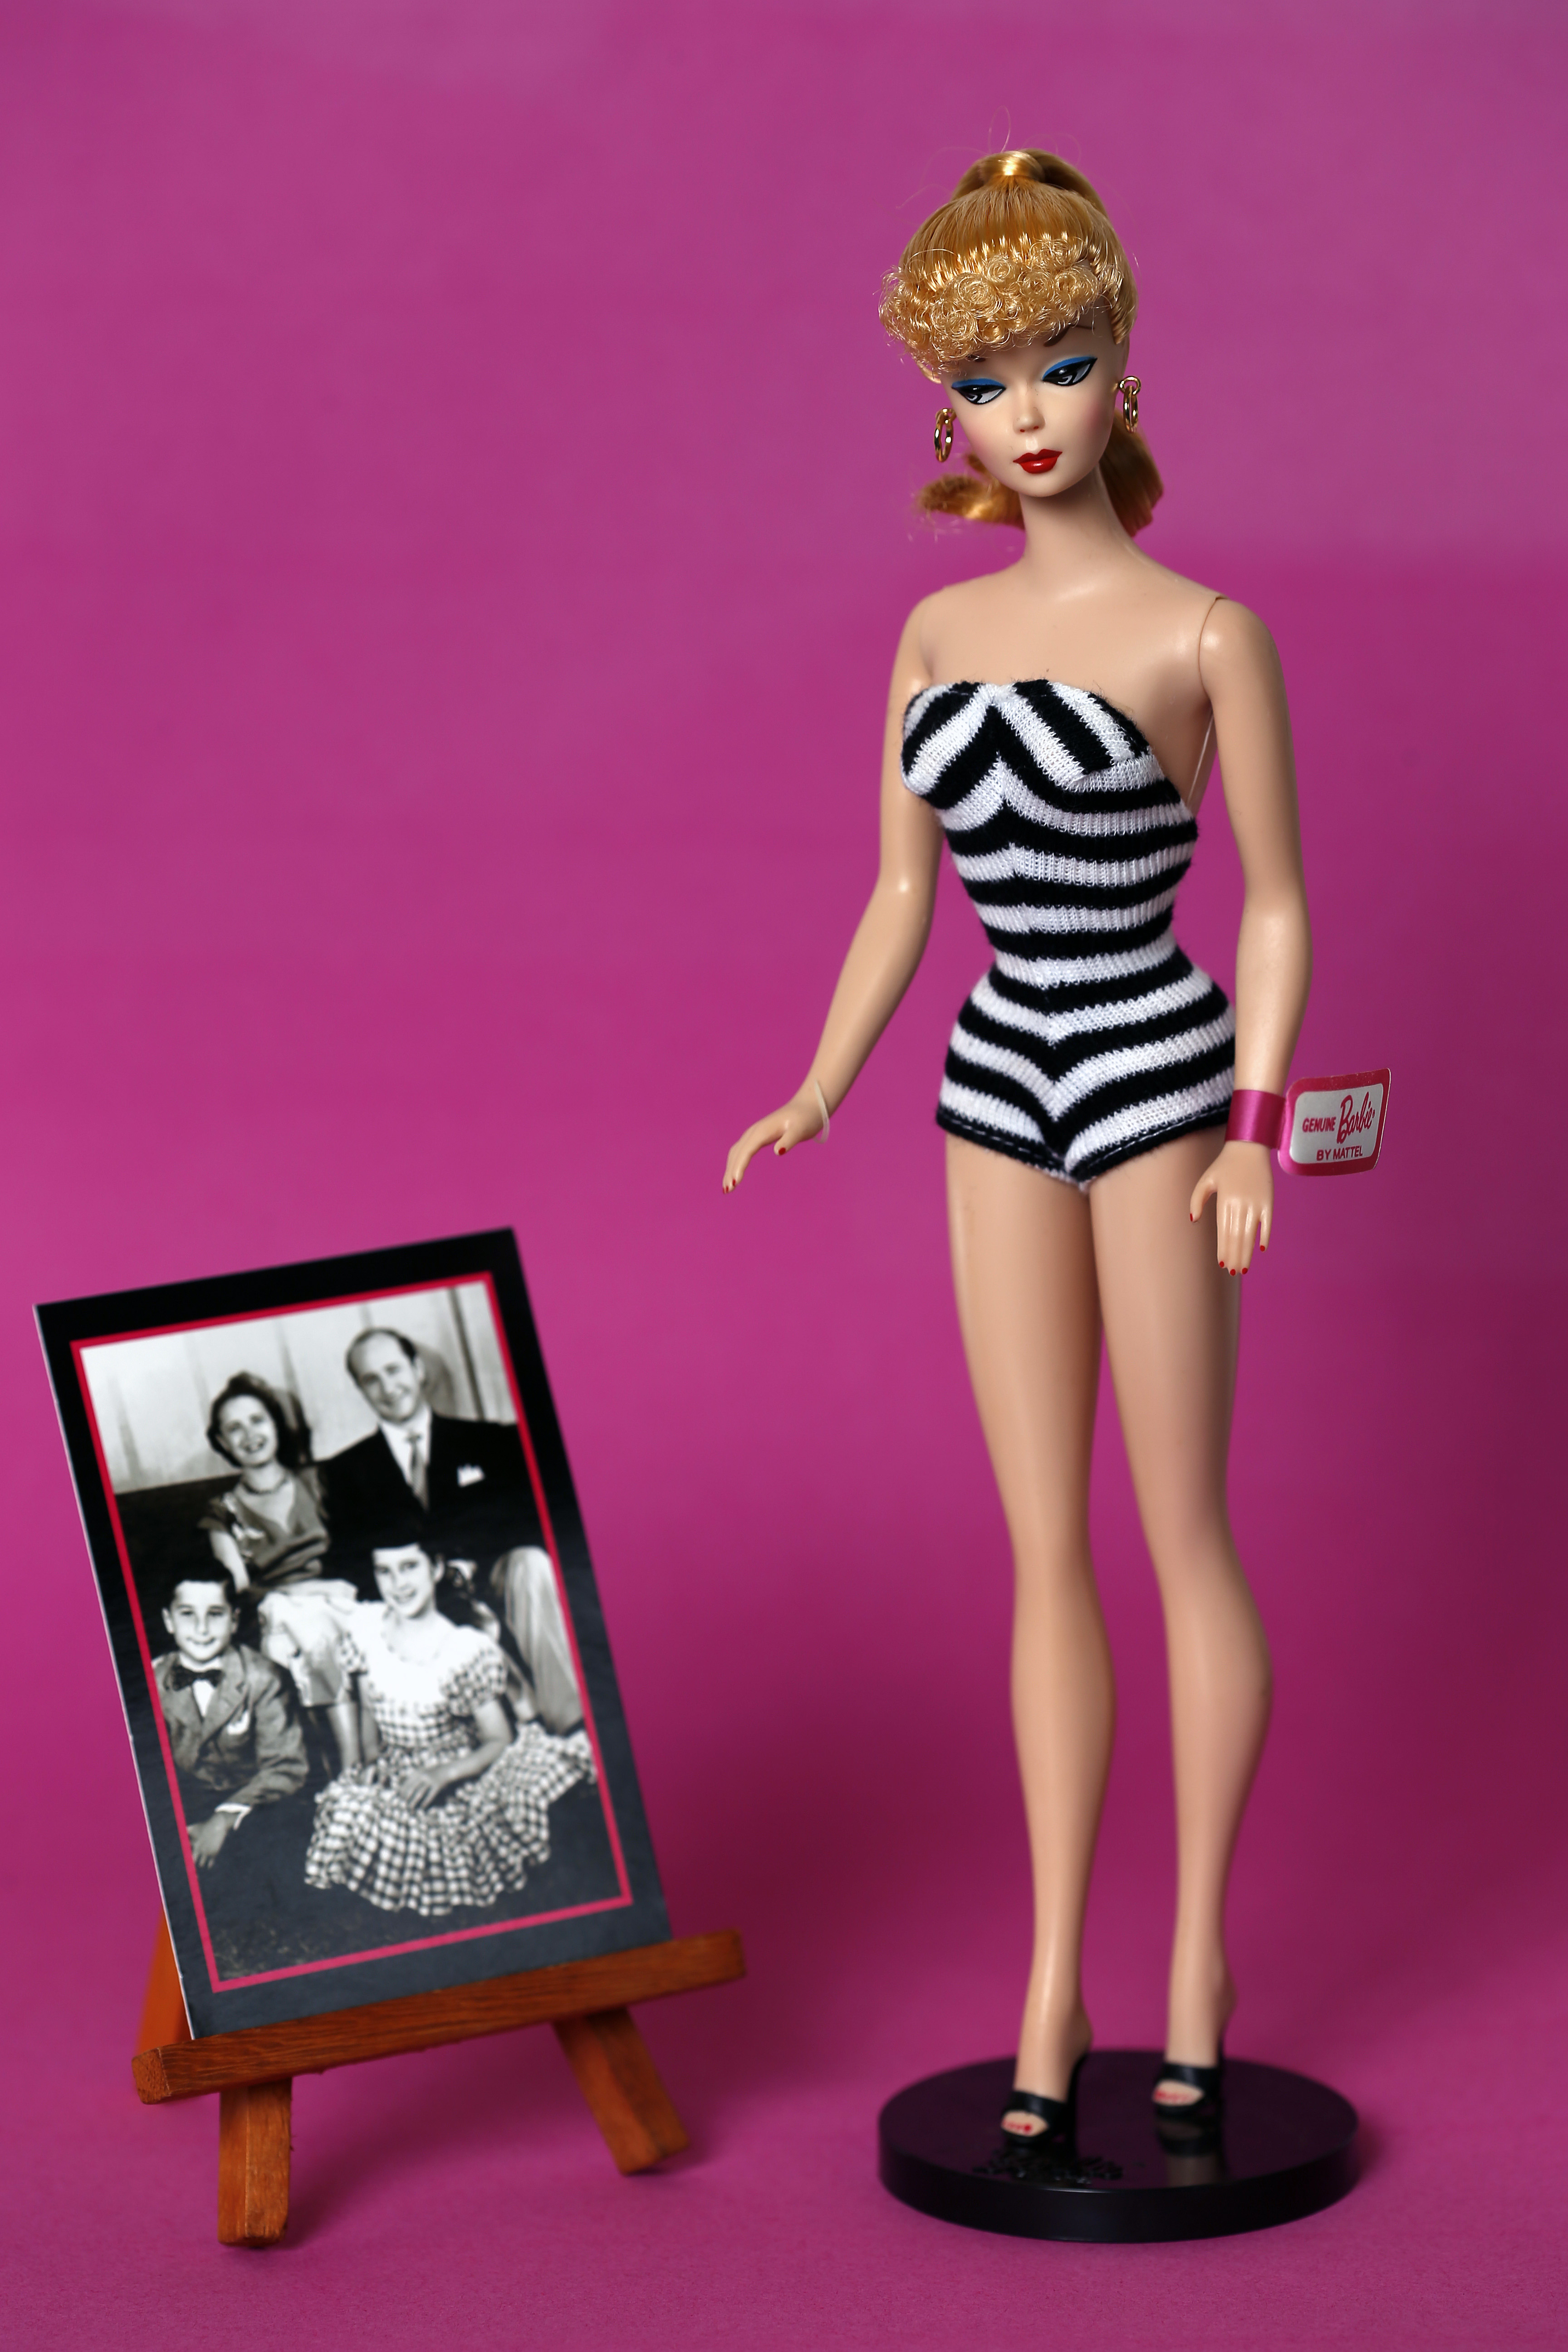 Barbie doll in vintage-style swimsuit stands next to a small easel displaying a black-and-white family photo